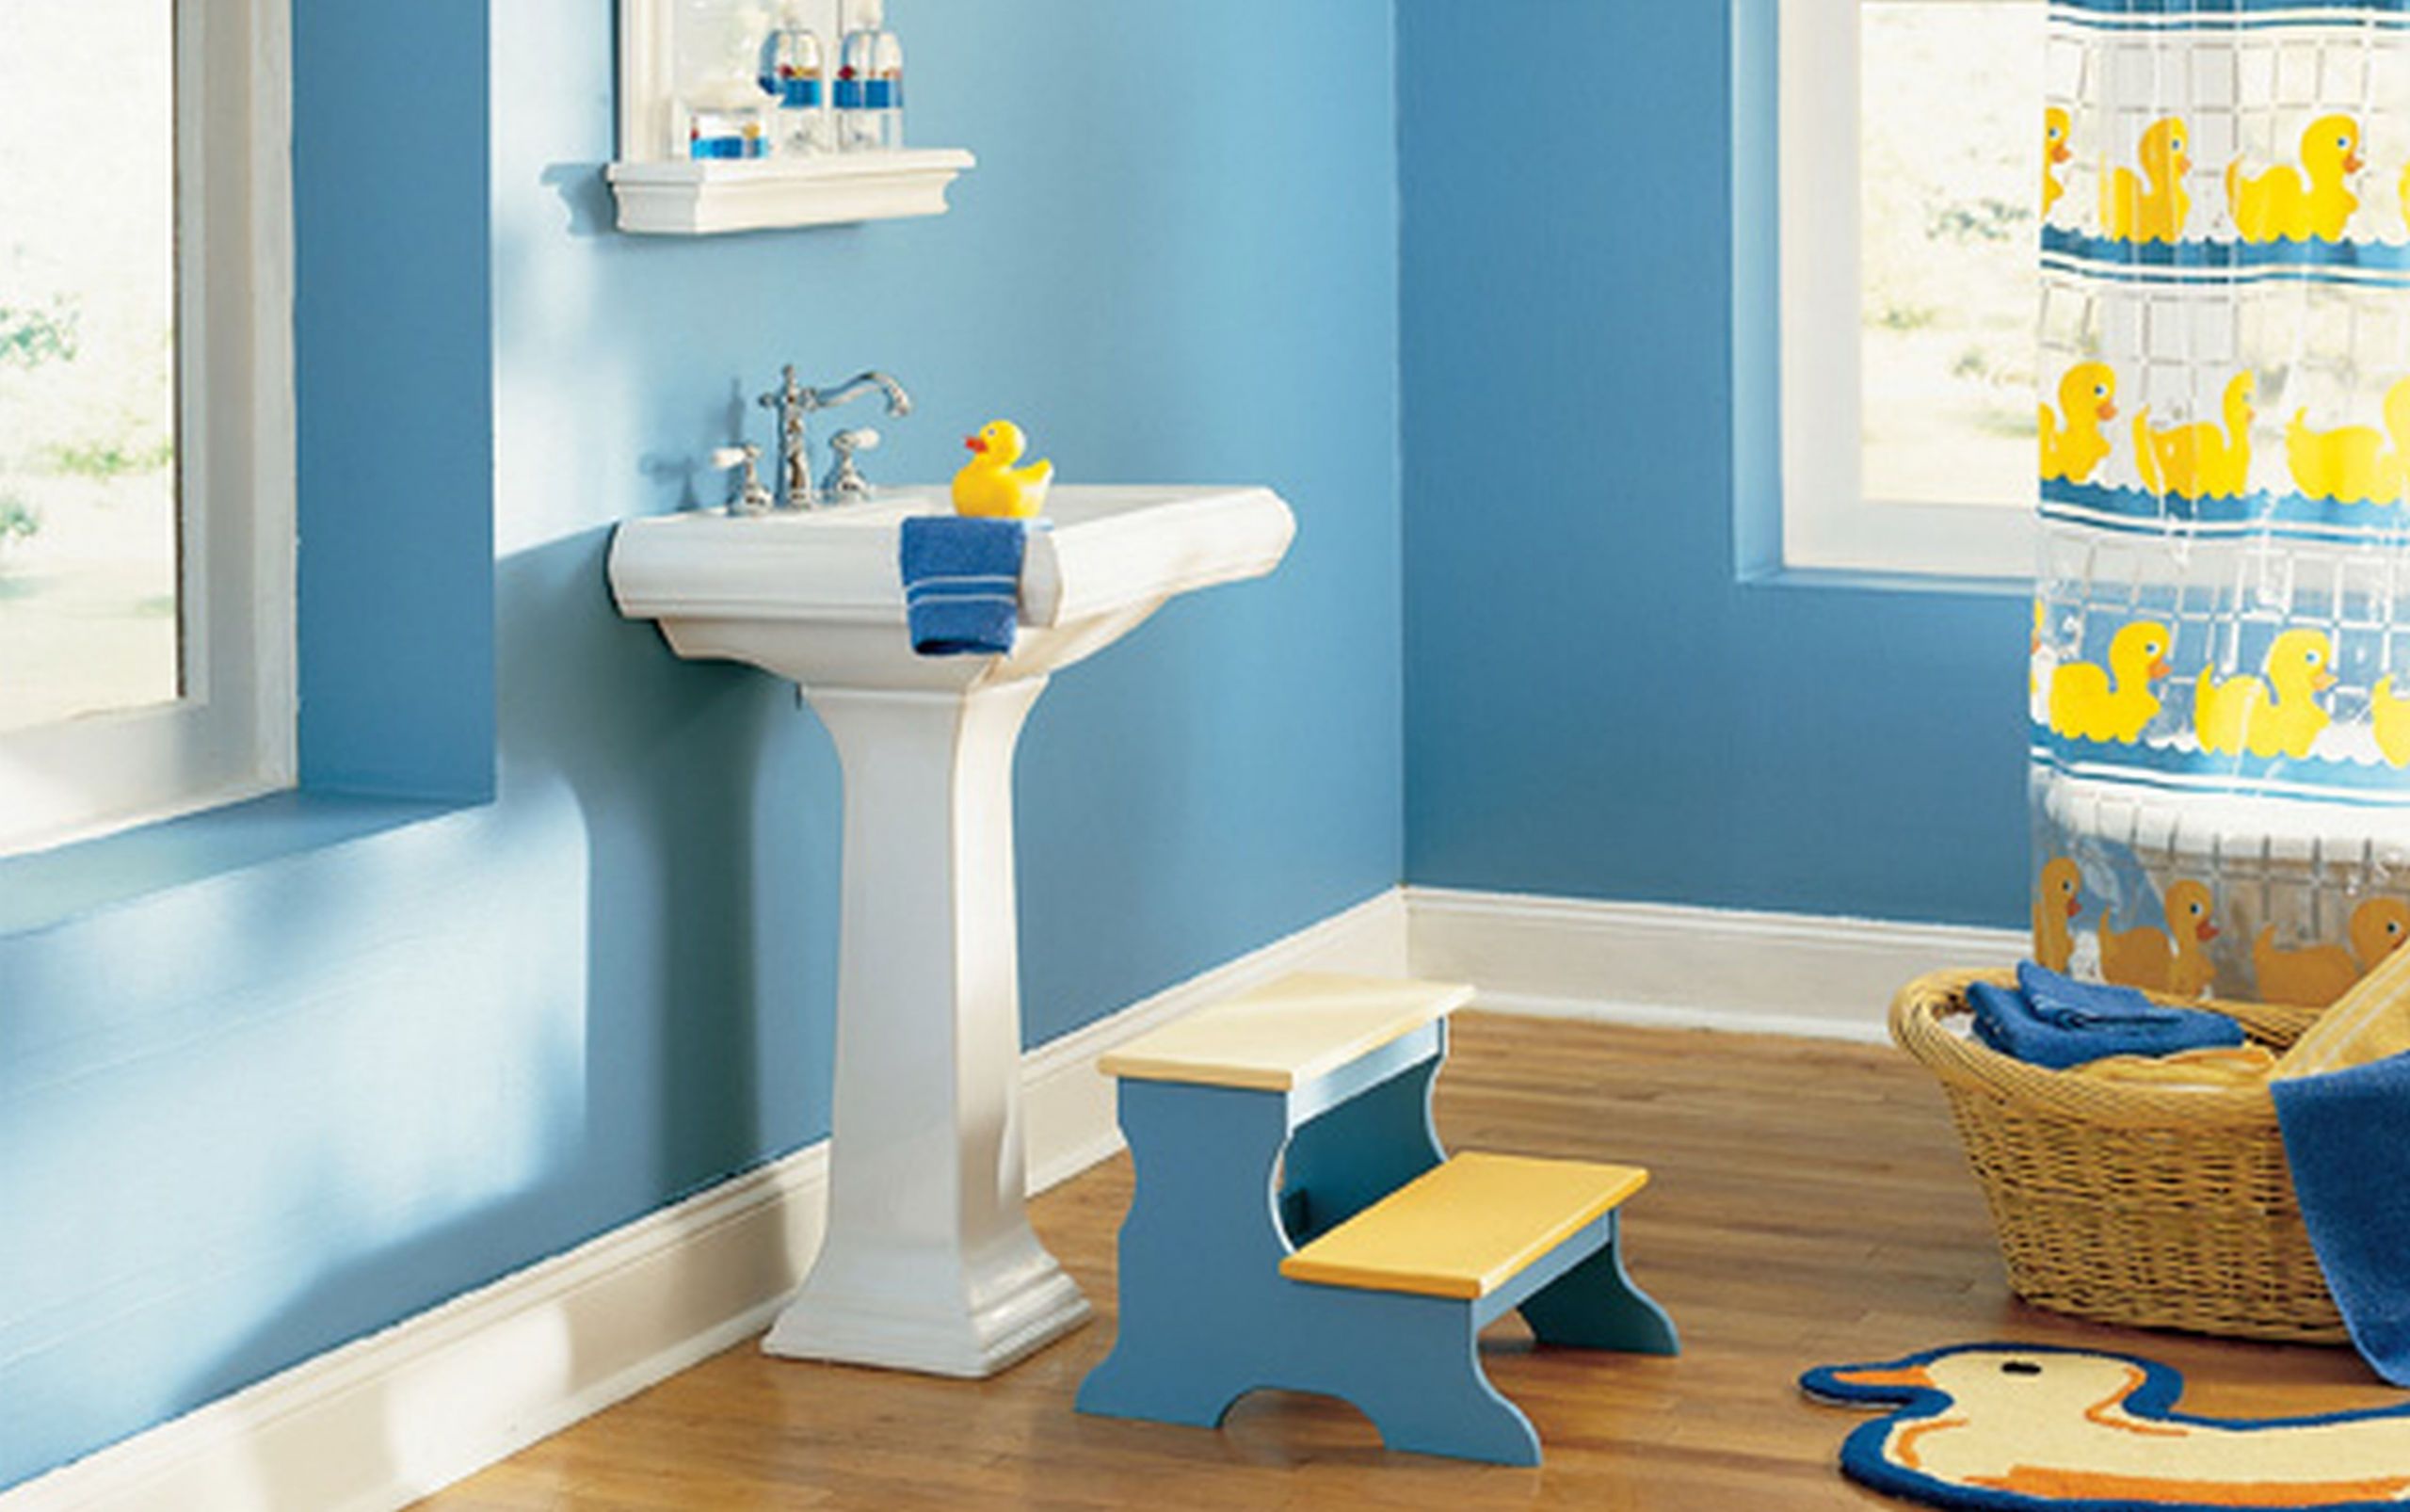 Bathroom Sets For Kids
 Top 20 Bathroom Products for Kids